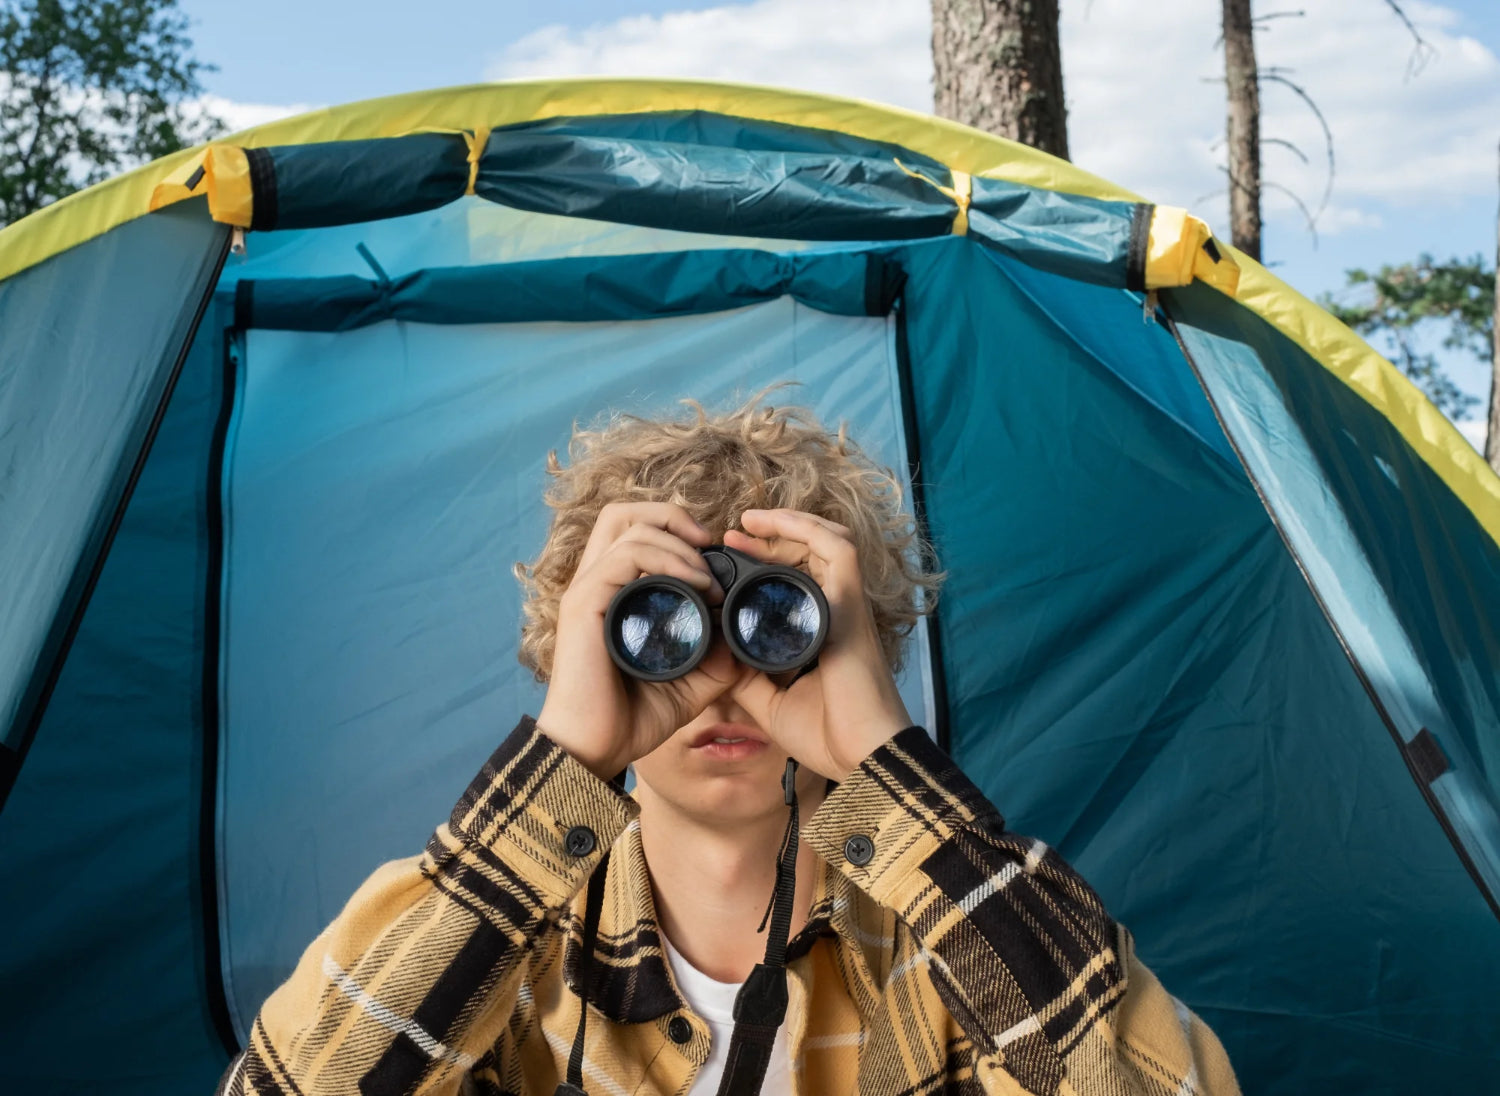 A person looks through binoculars in a camp setting